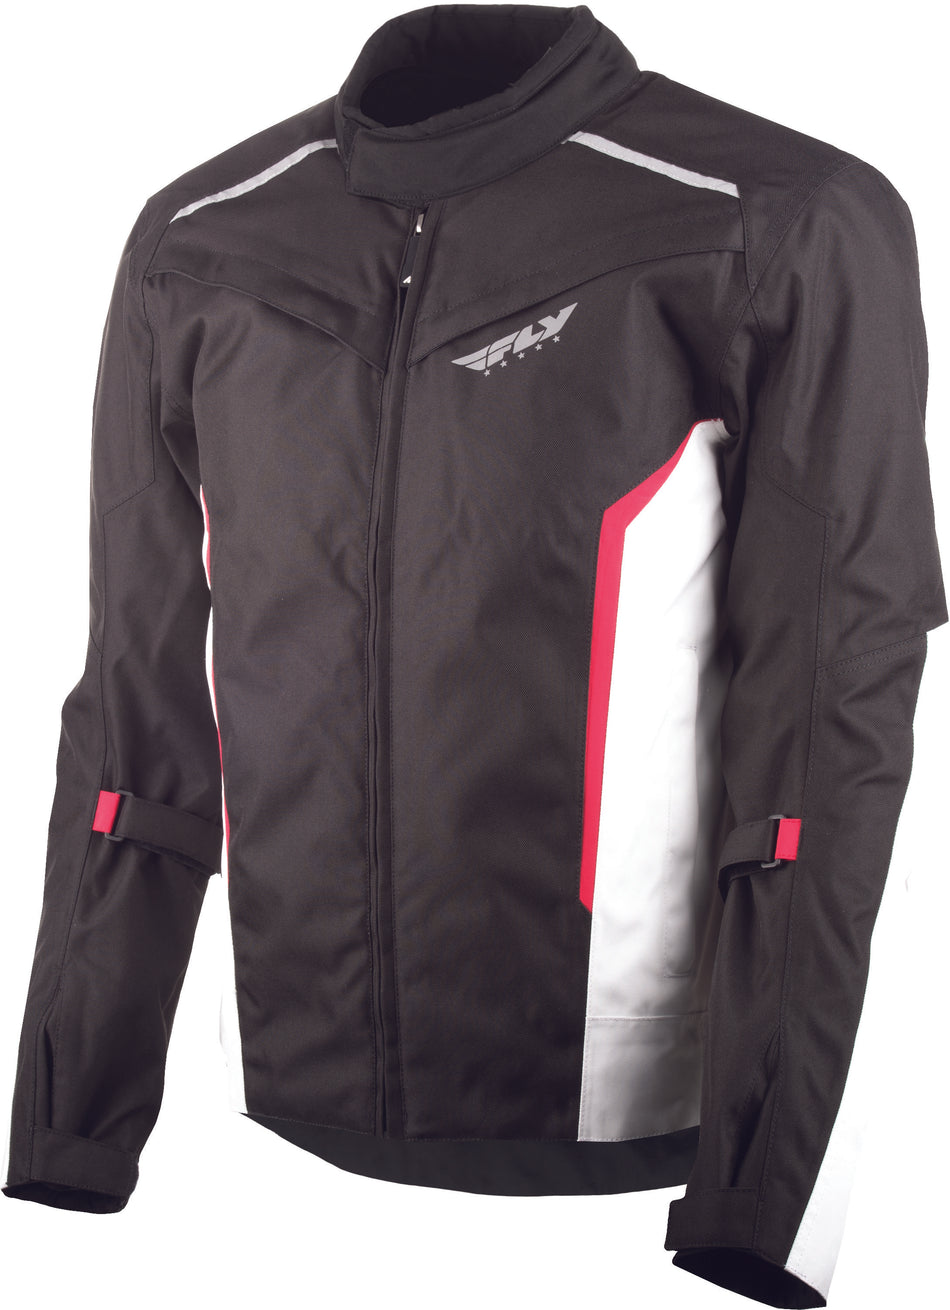 FLY RACING Baseline Jacket Black/White/Red 2x #5958 477-2091~6